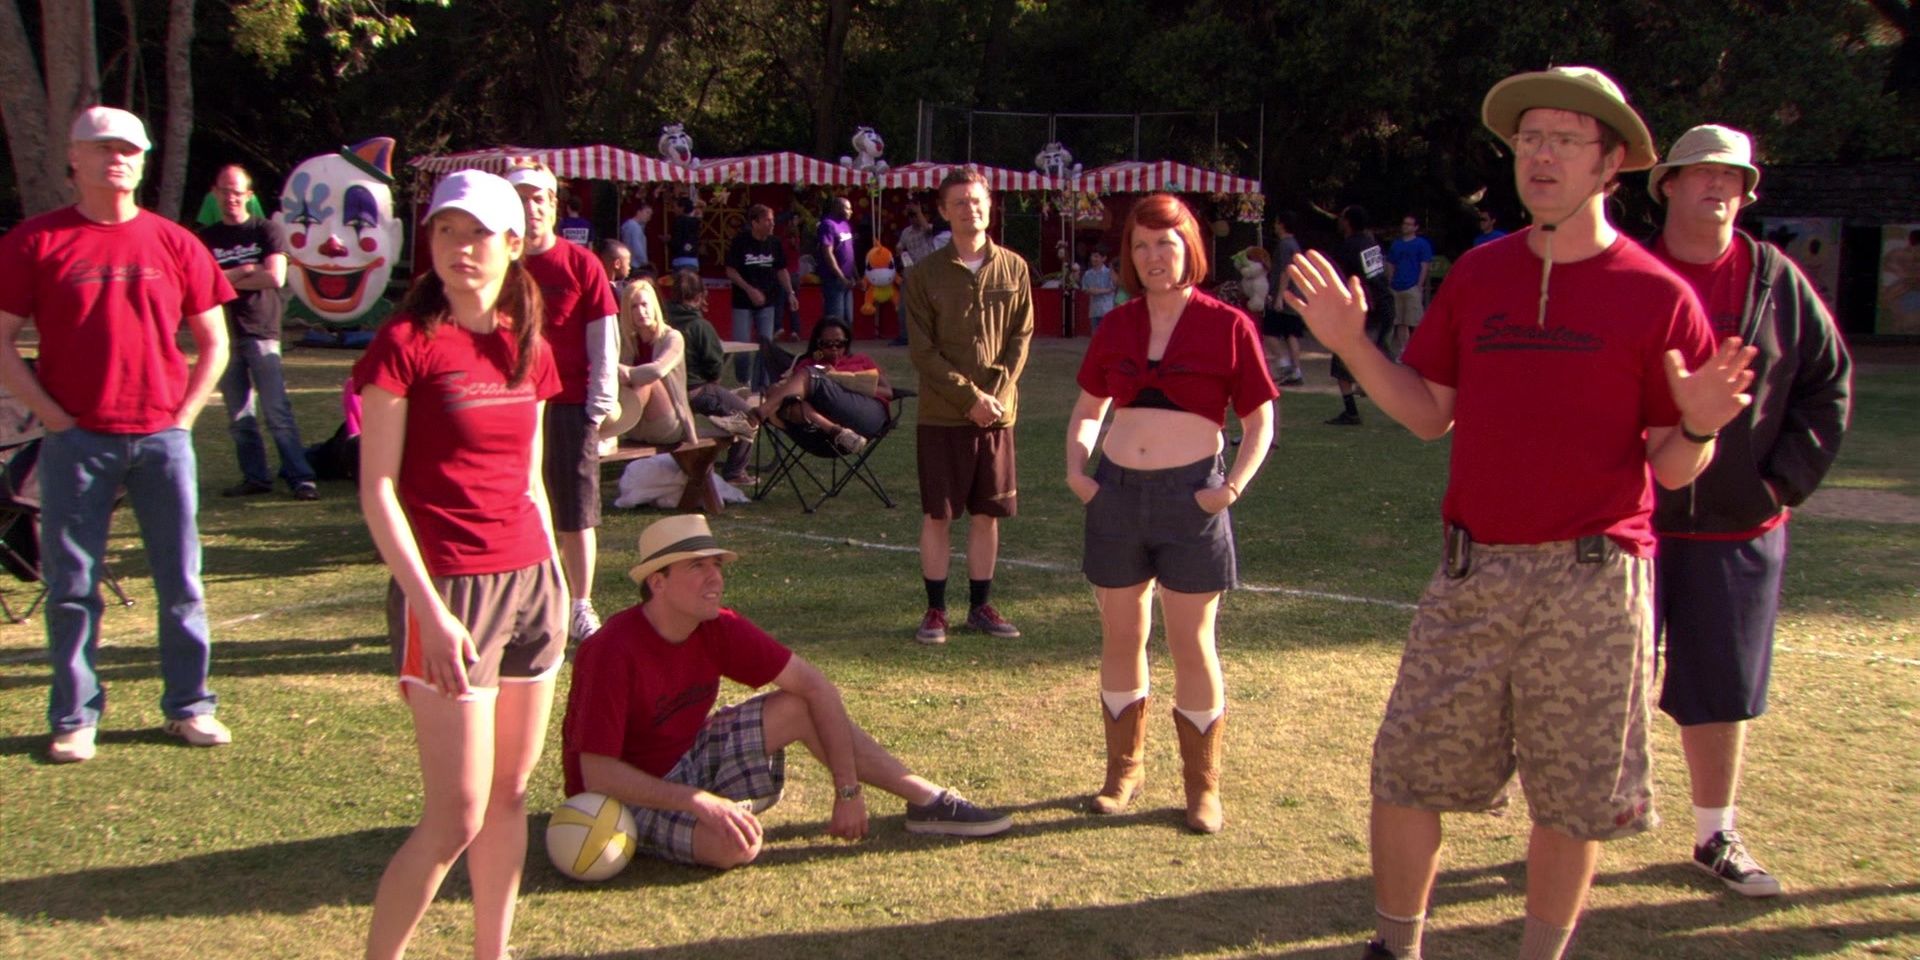 Pam, Dwight, Meredith, and Kevin stand around waiting to play volleyball in the park in The Office